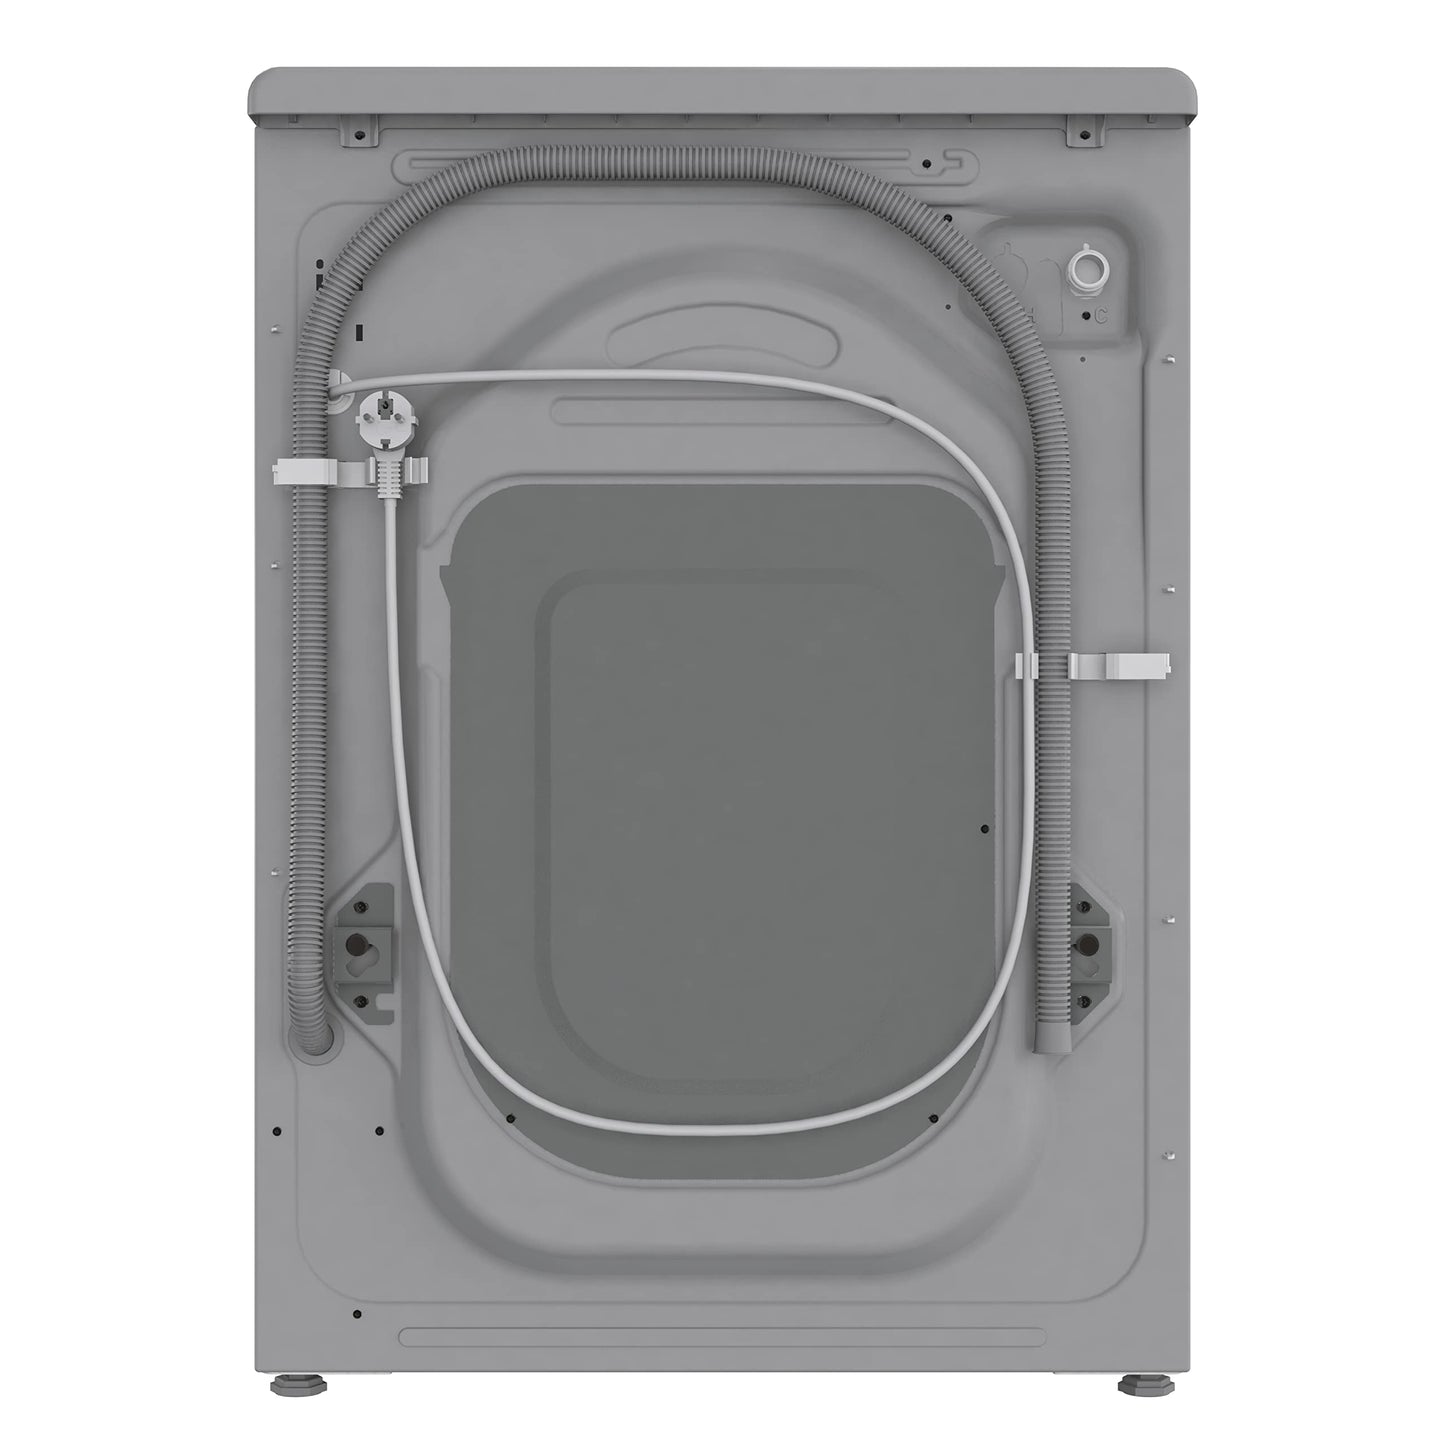 Gorenje WNEI84AS/A, 8 Kg Fully Automatic Front Load Washing Machine, 16 Programs, Energy and Water Efficient, Wave Drum, 1400 RPM, Silver, Made in Slovenia, 1 Year Warranty